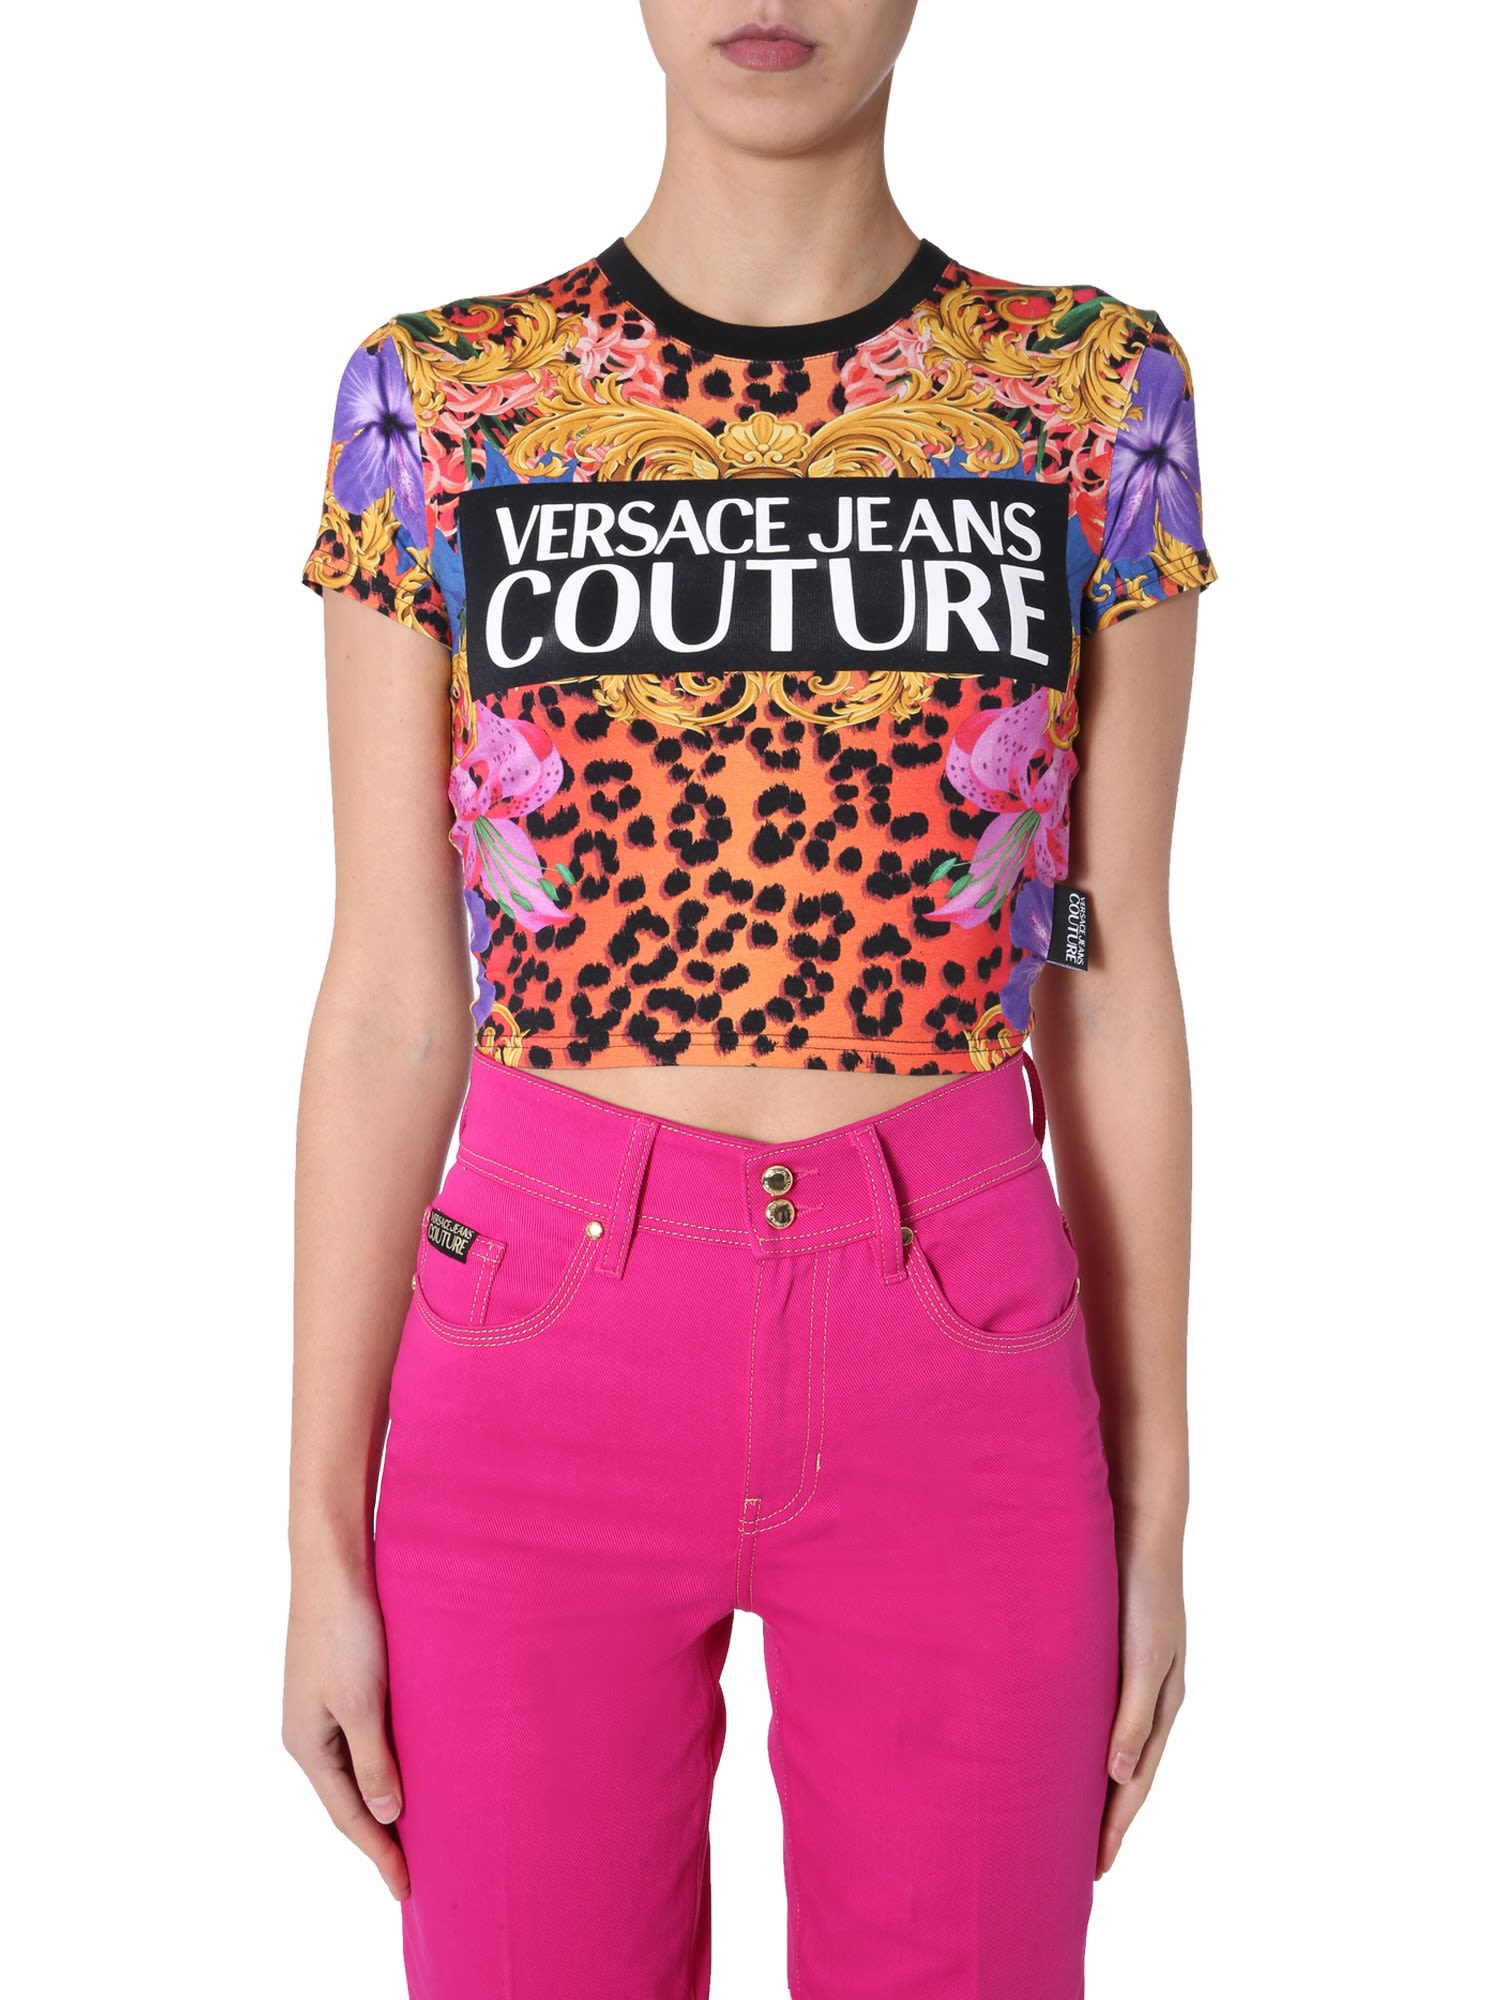 VERSACE JEANS COUTURE CROPPED TOP,11235152